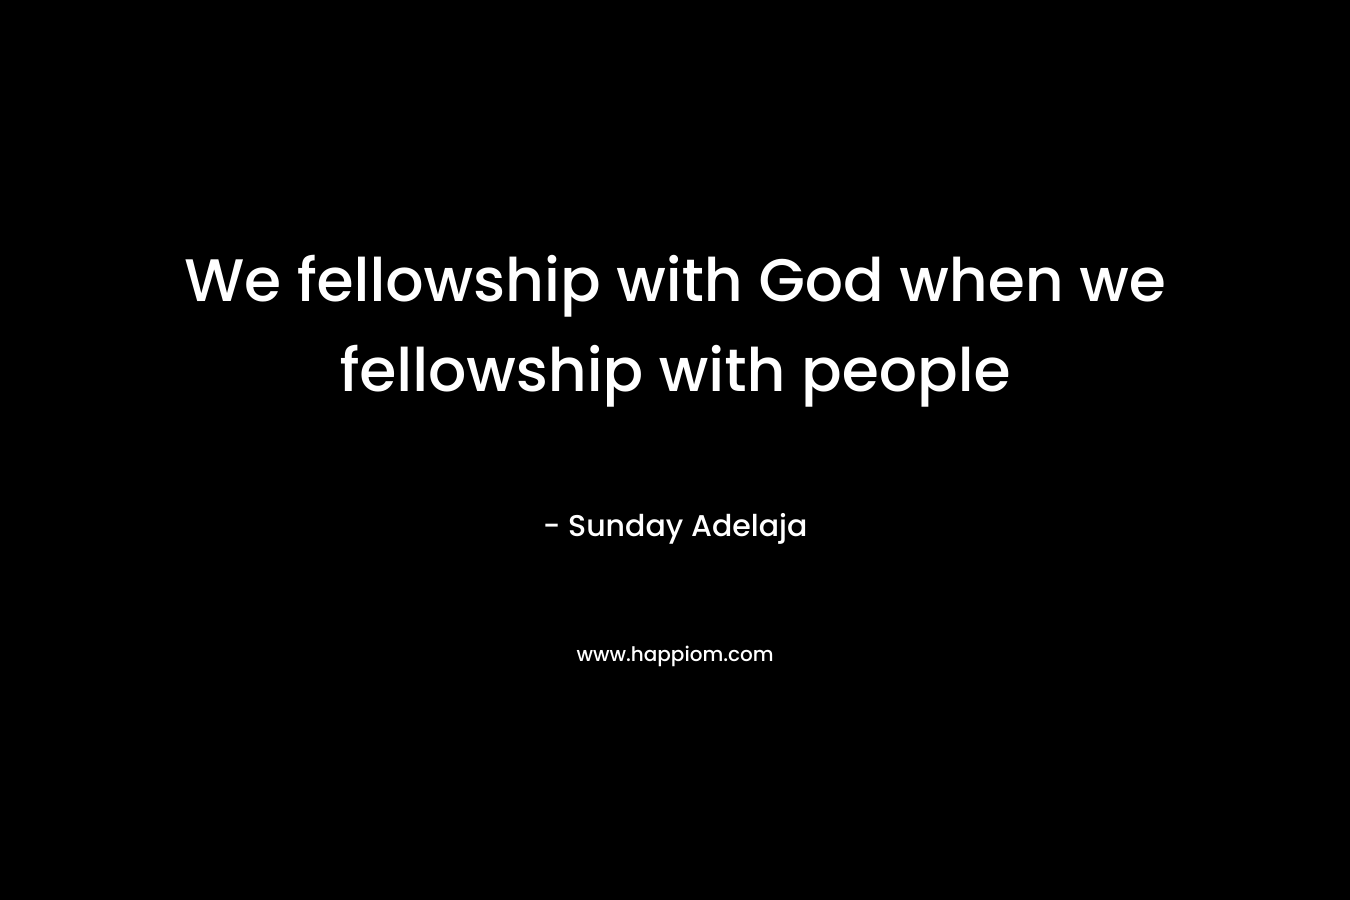 We fellowship with God when we fellowship with people